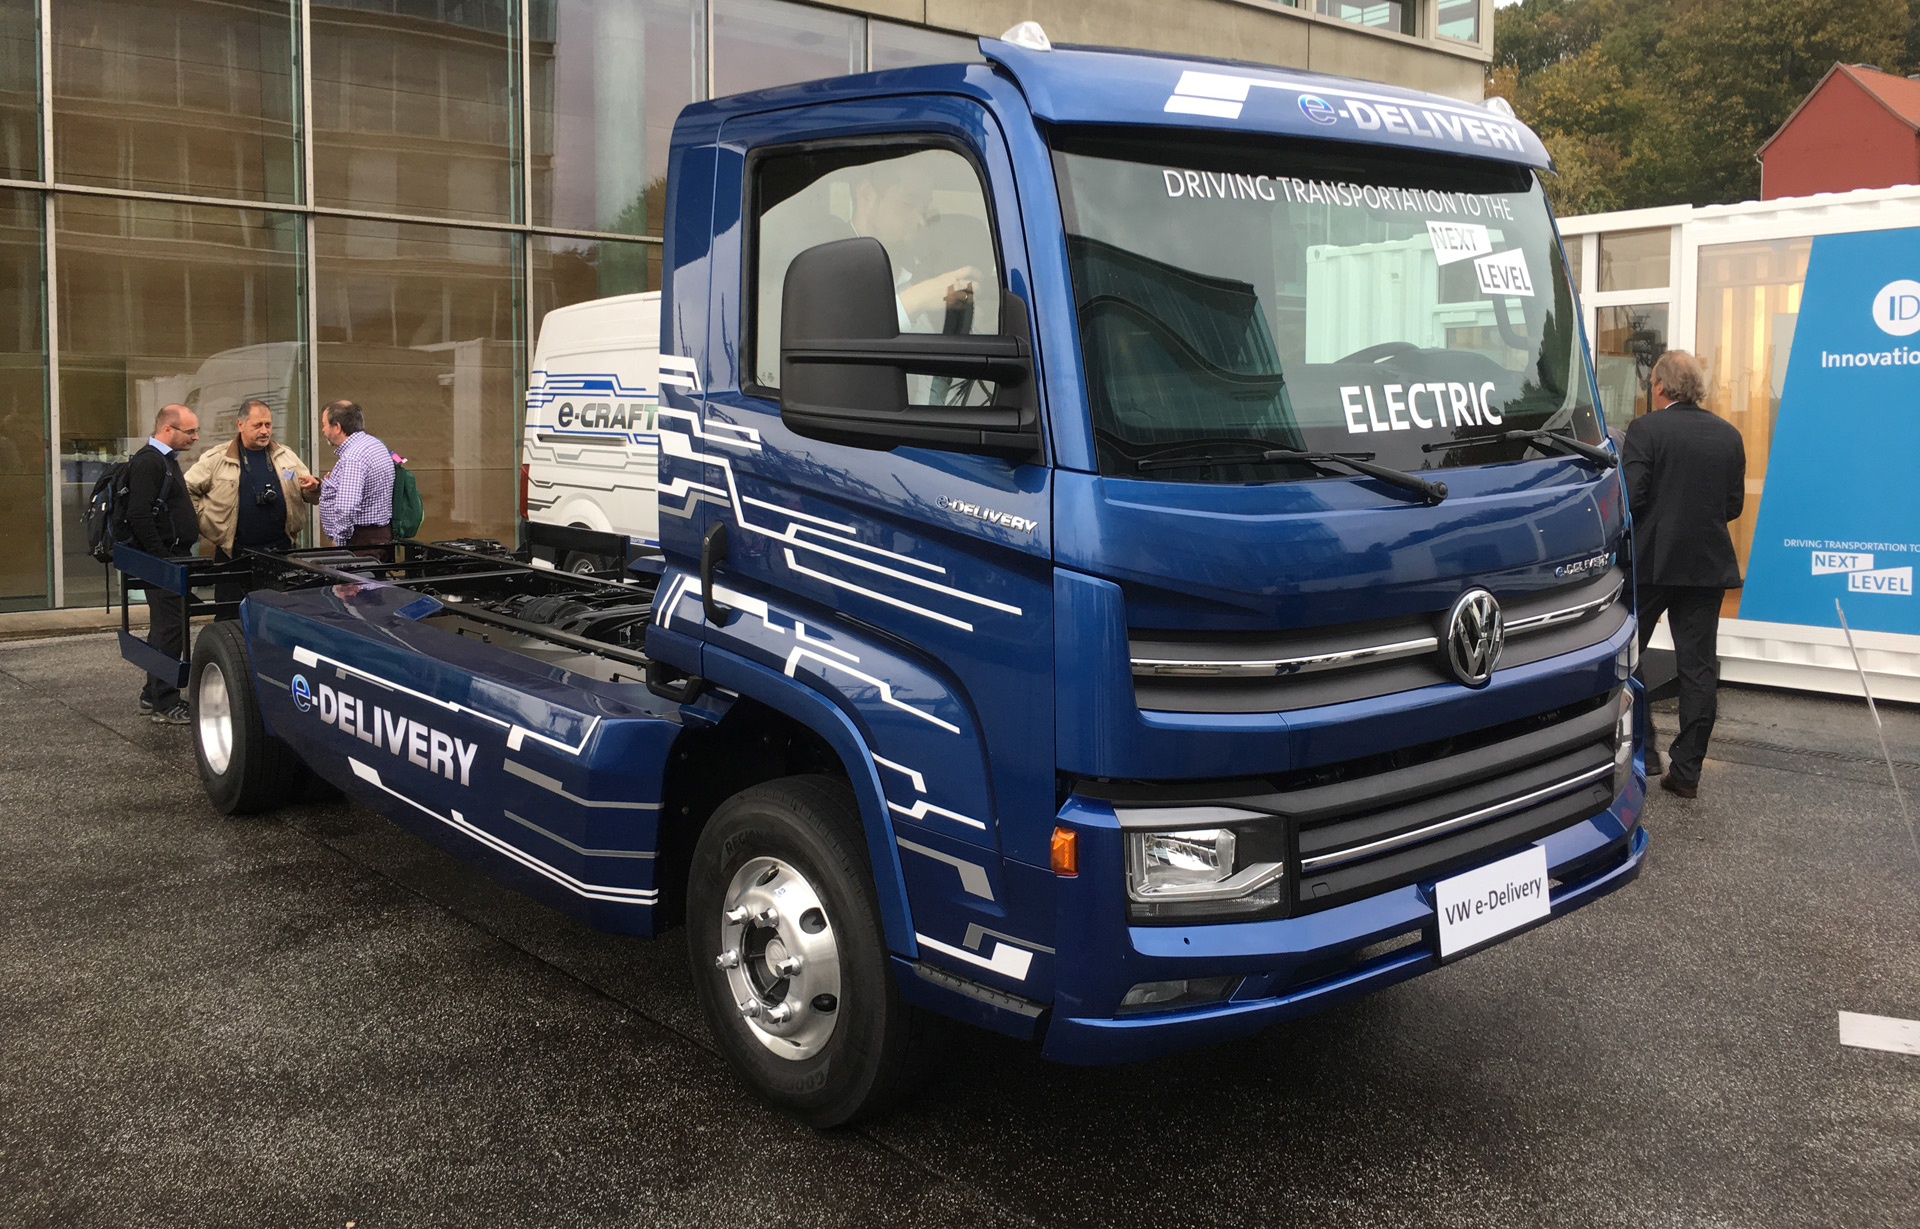 Volkswagen Group promises electric trucks and buses by 2018